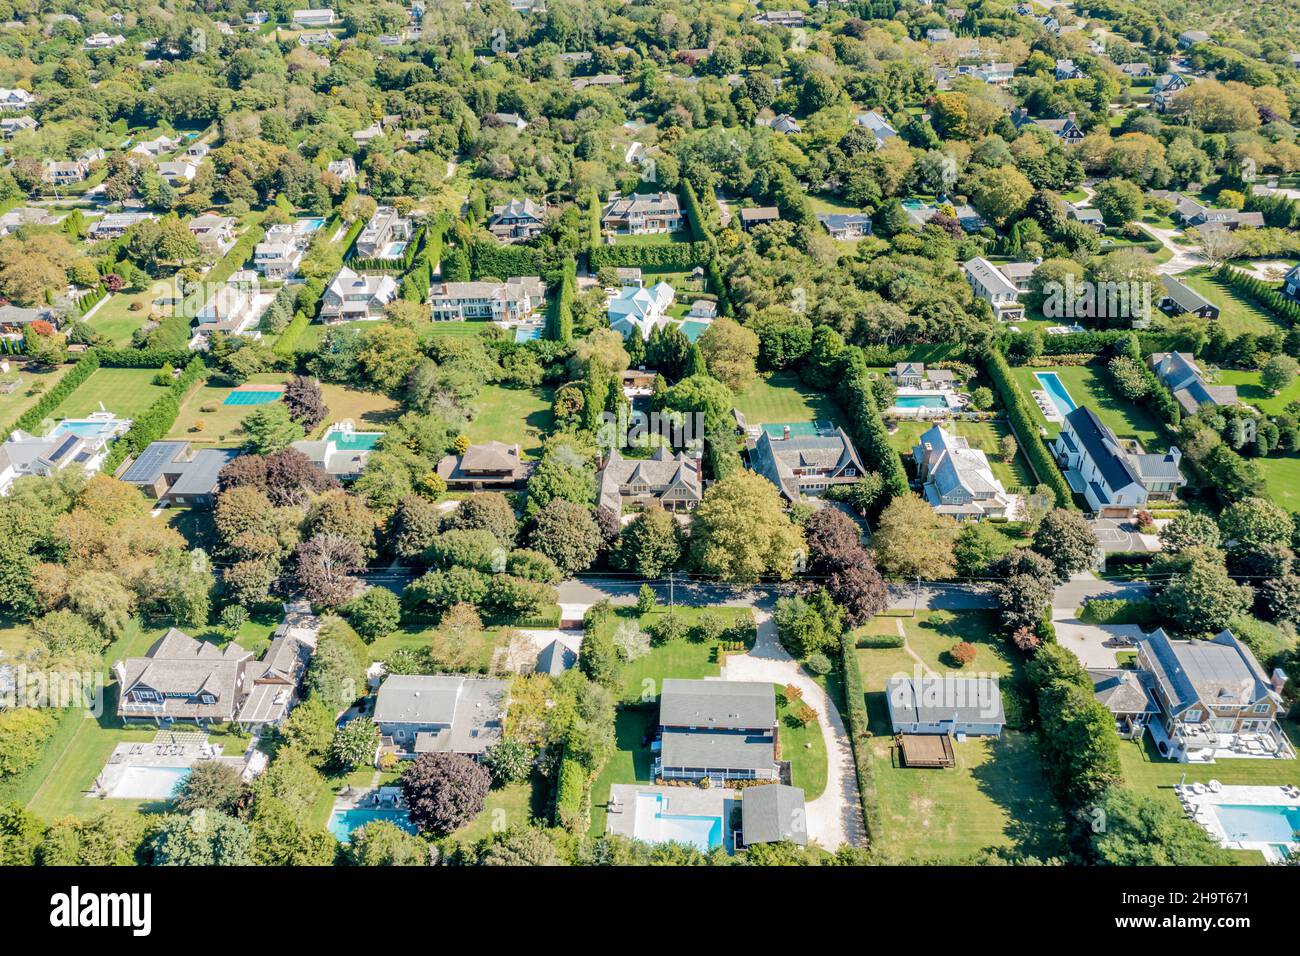 Aerial view of Miankoma lane and Meeting house lane and the homes on those streets in Amagansett, NY Stock Photo